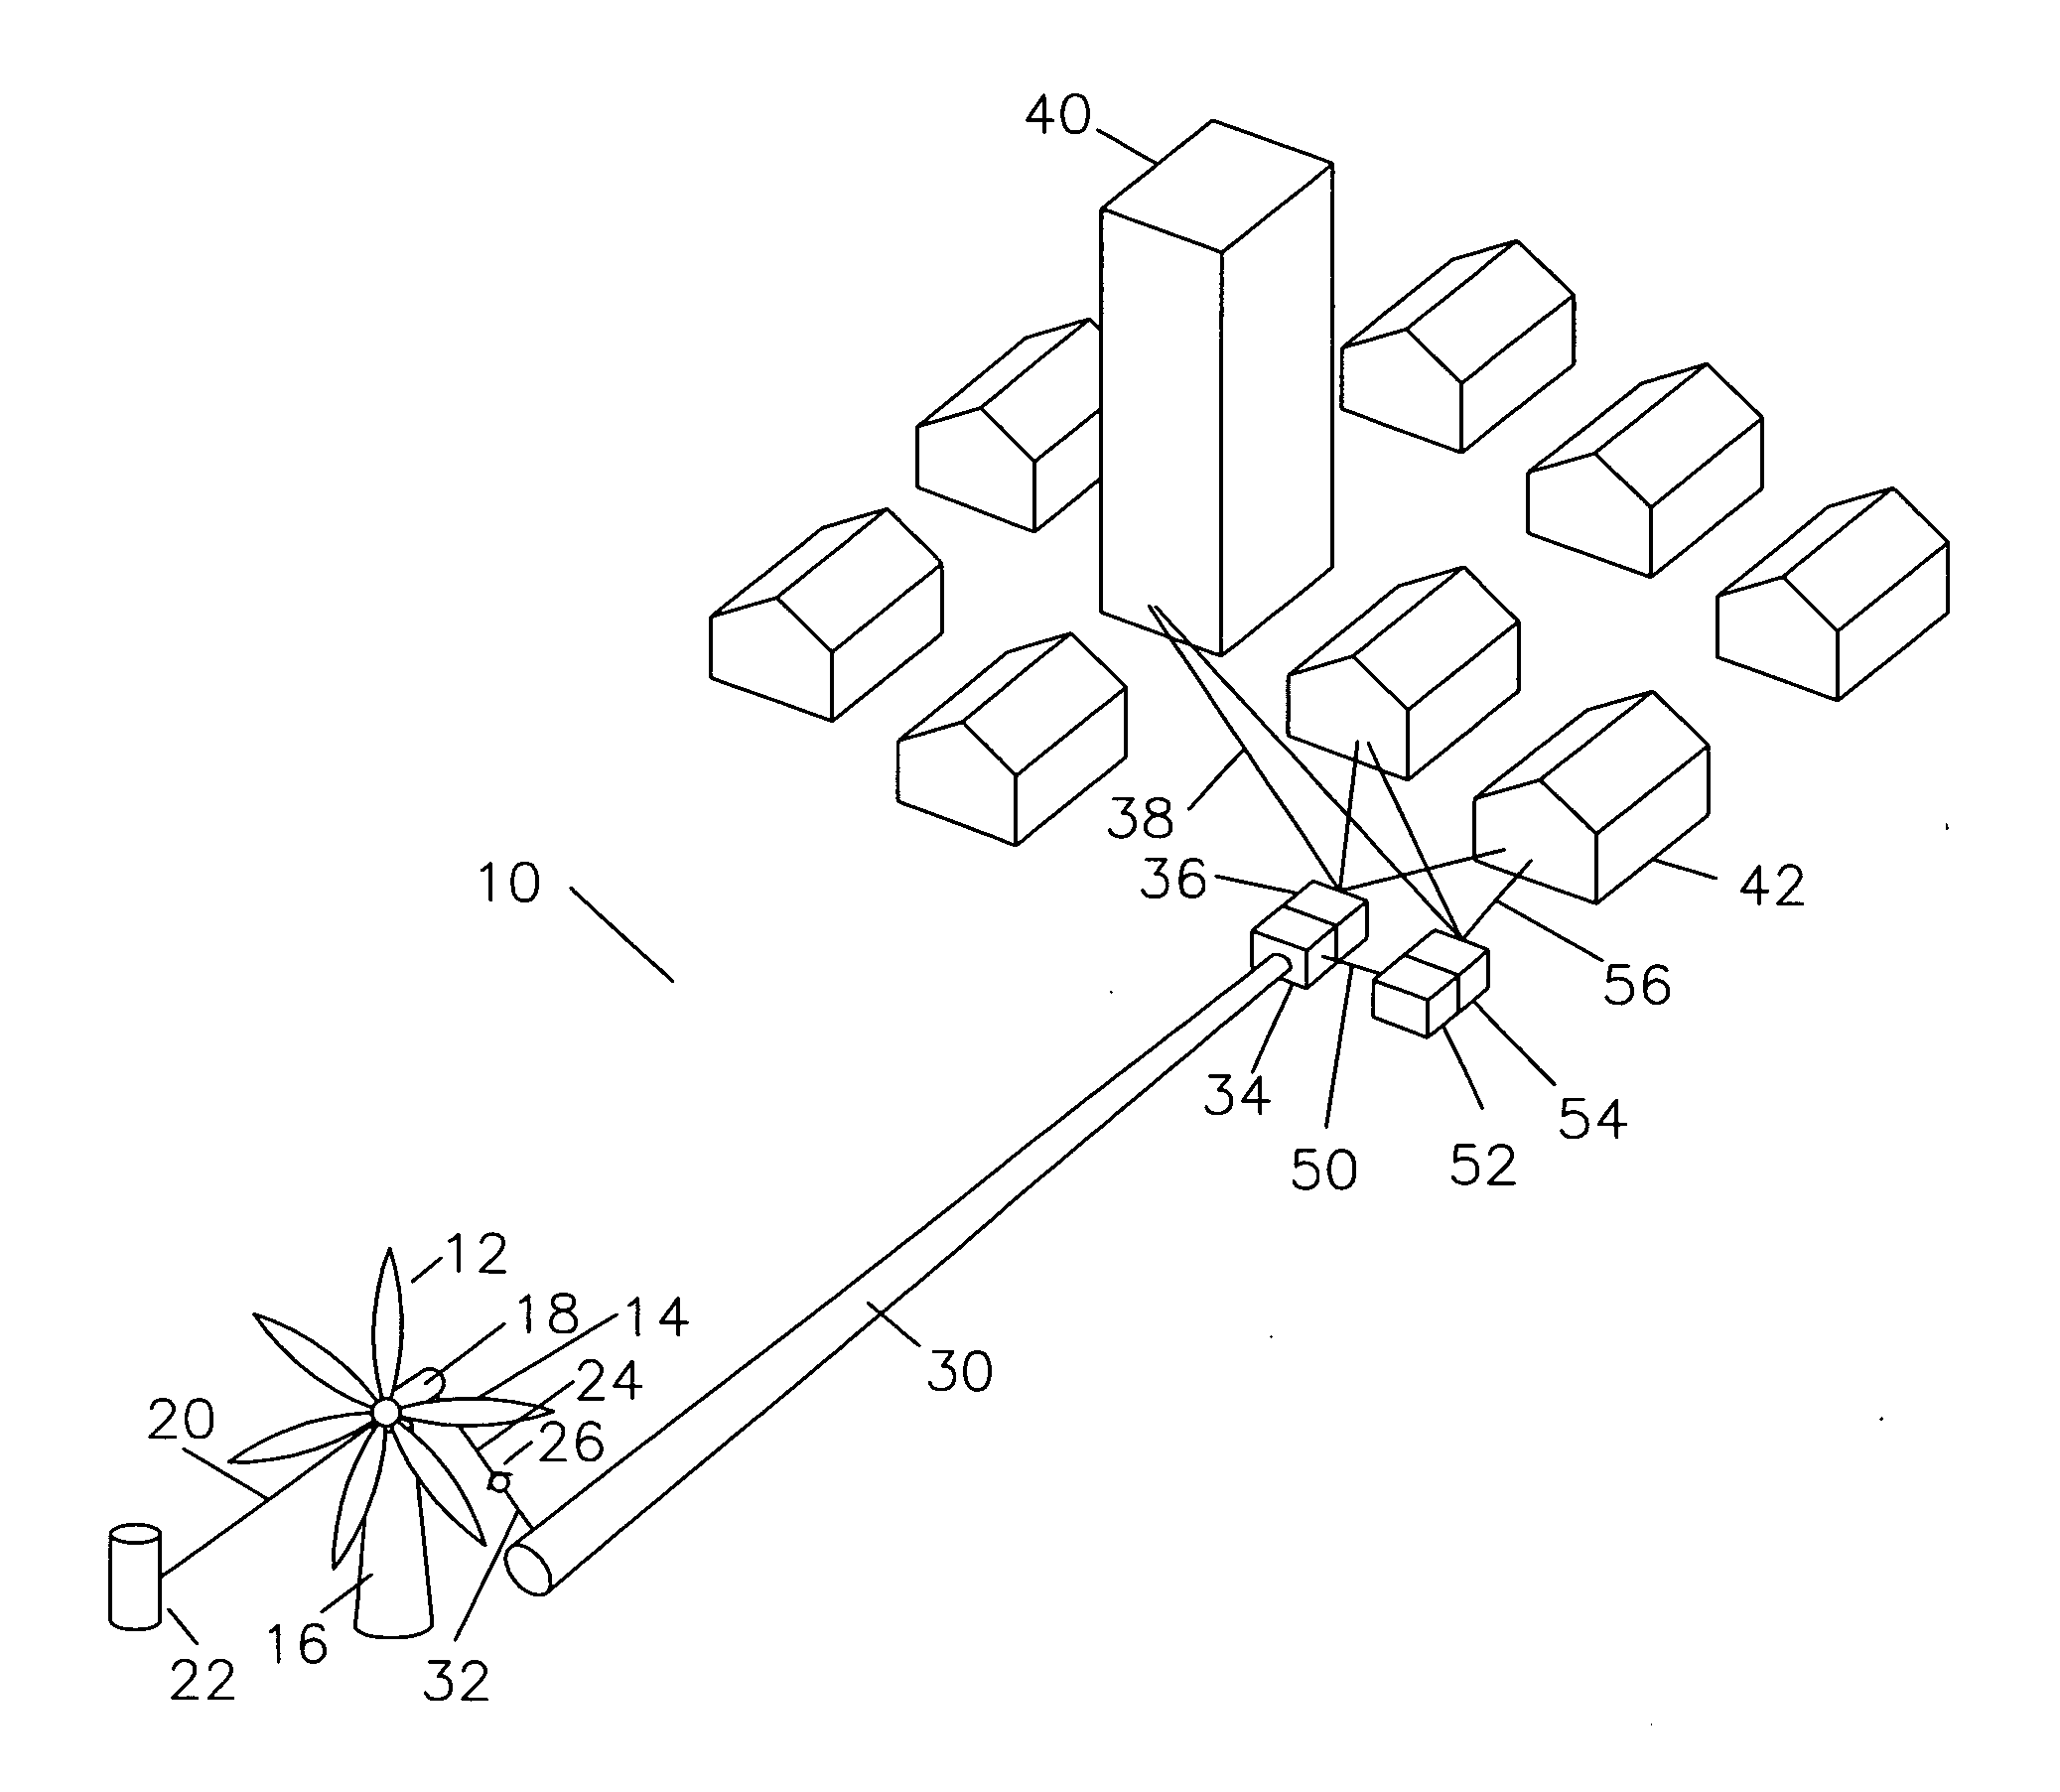 Method for transmission and storage of wind energy